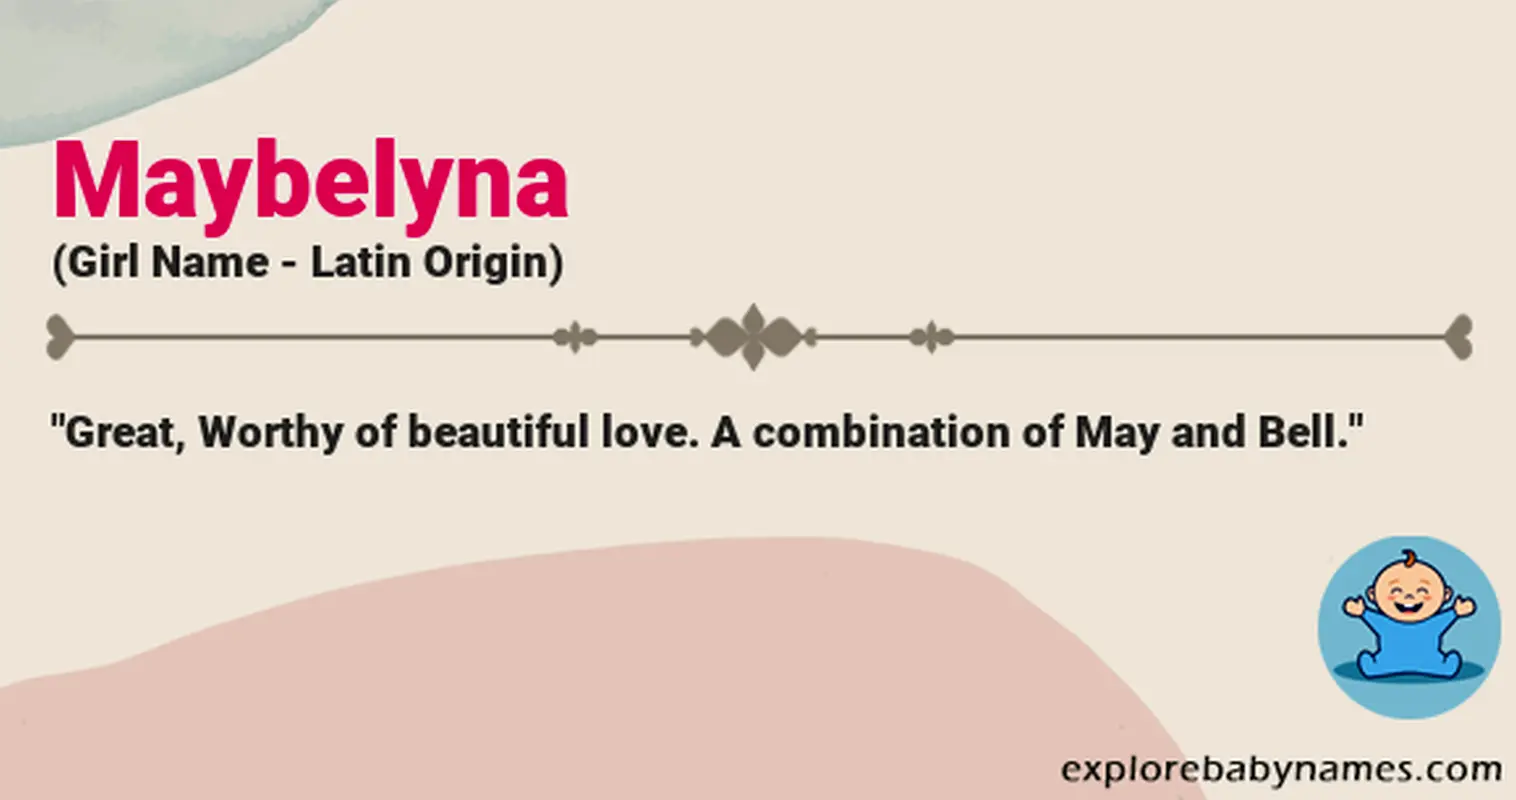 Meaning of Maybelyna